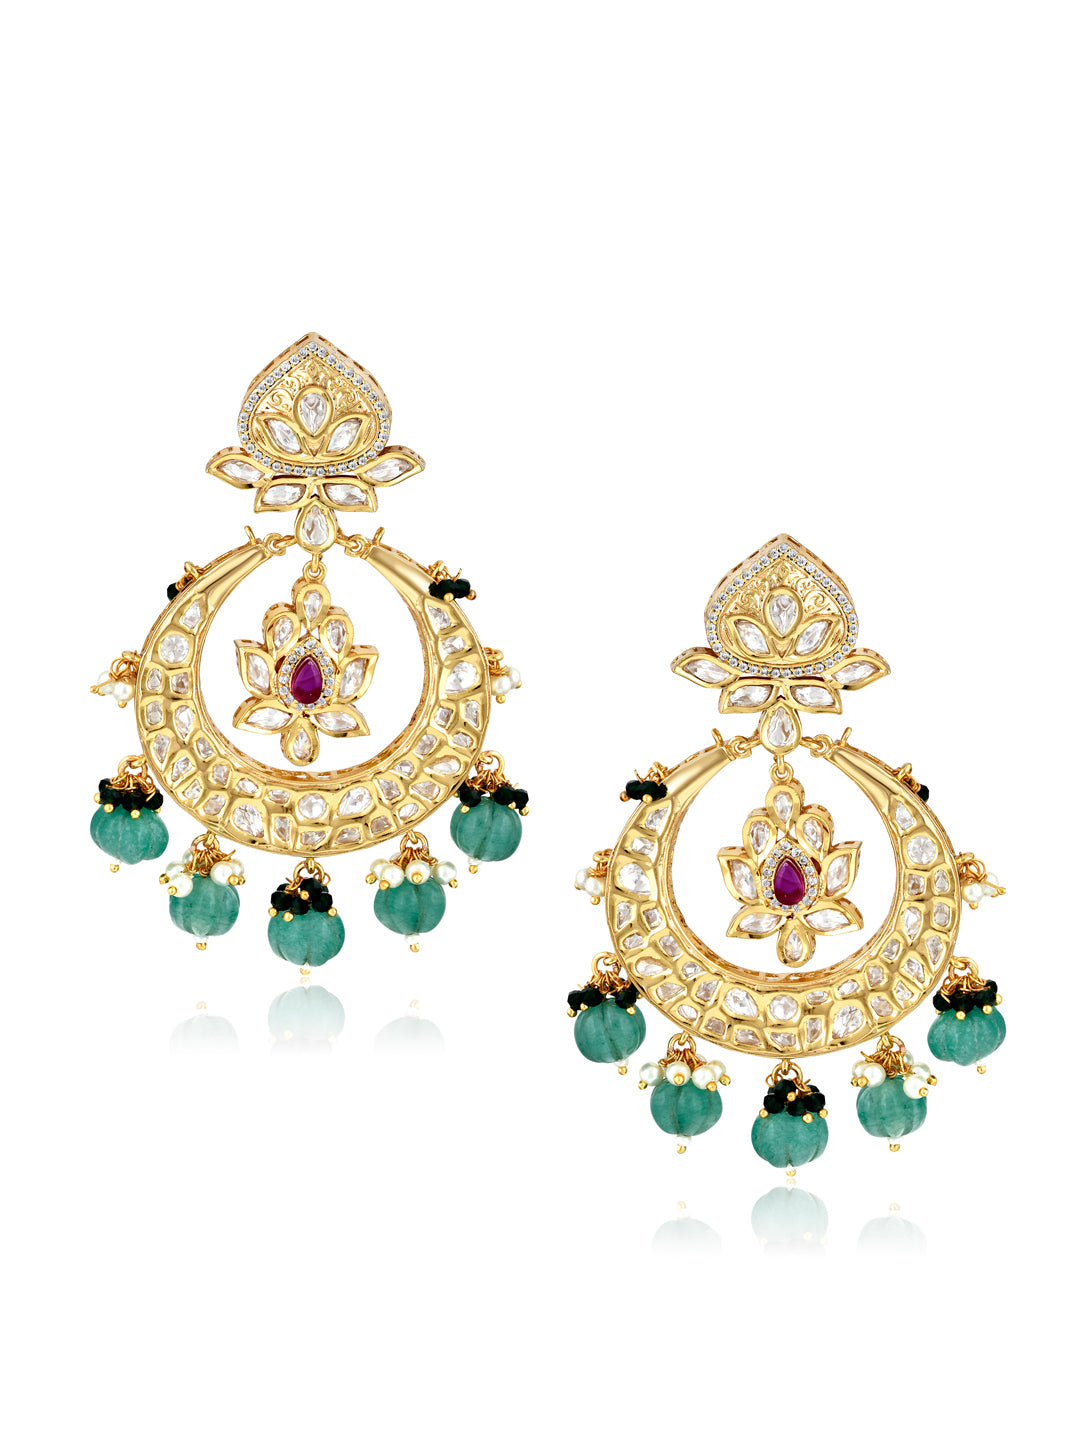 Statement Bridal Earrings | Shop Beautiful Bridal Jewelry and Gifts